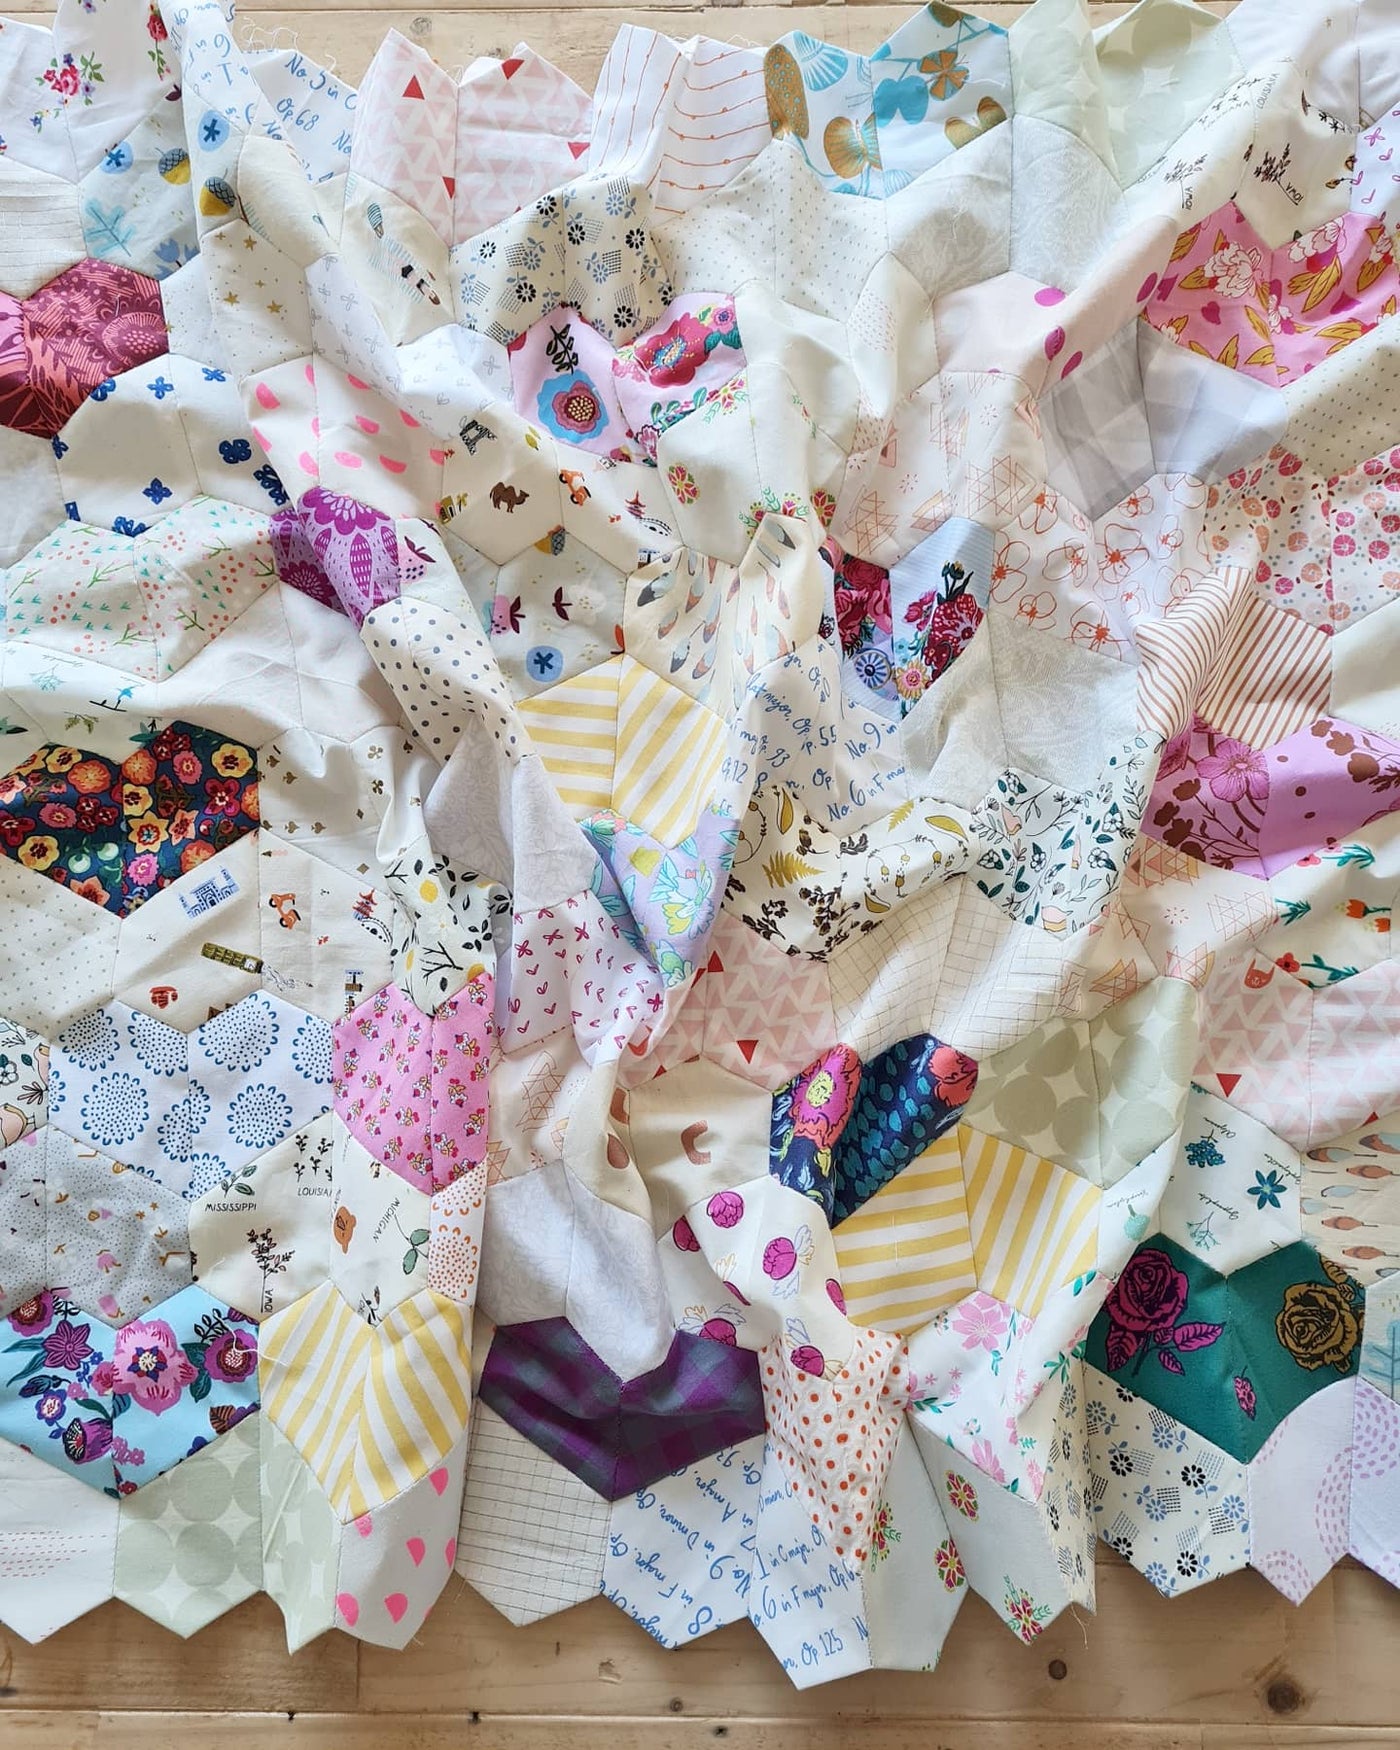 Warm Hearted Quilt 3 in 1 Bundle